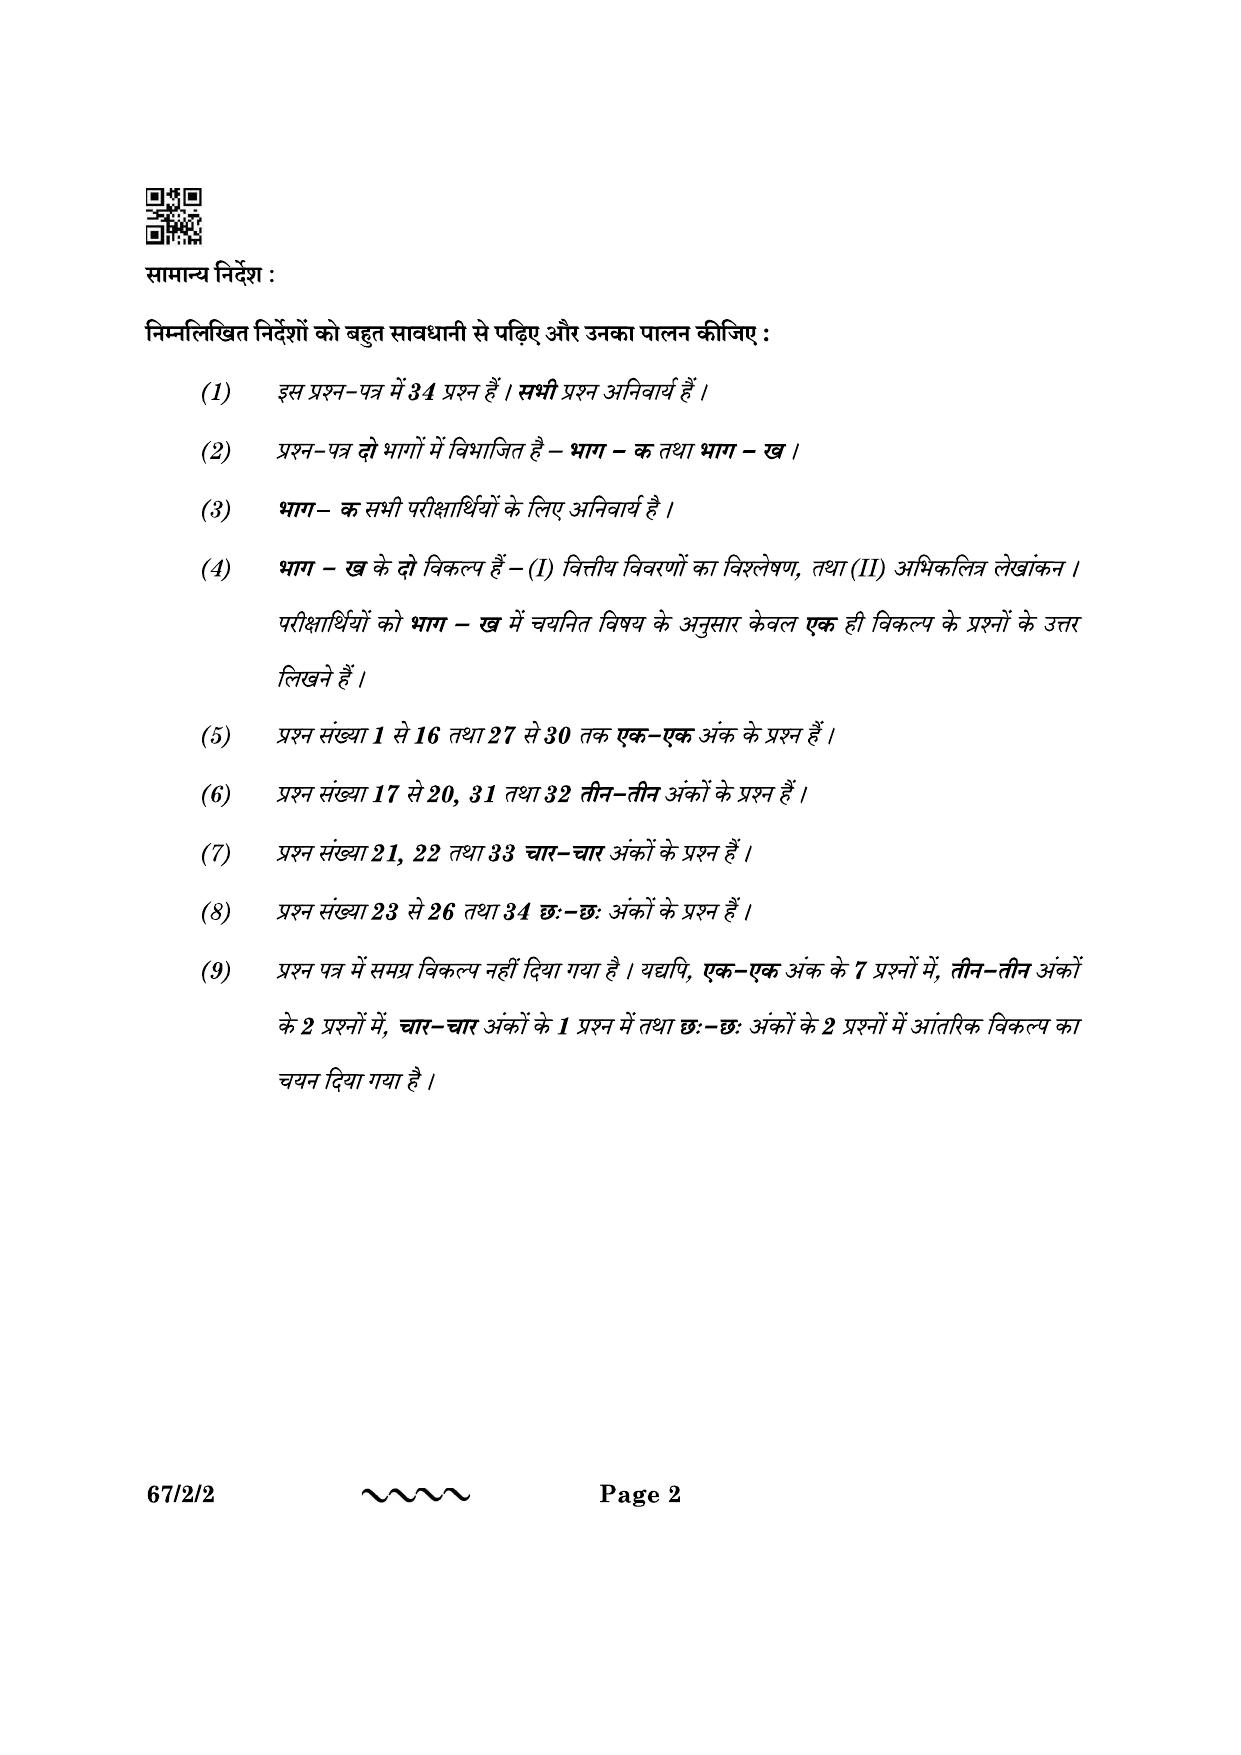 CBSE Class 12 67-2-2 Accountancy 2023 Question Paper - Page 2